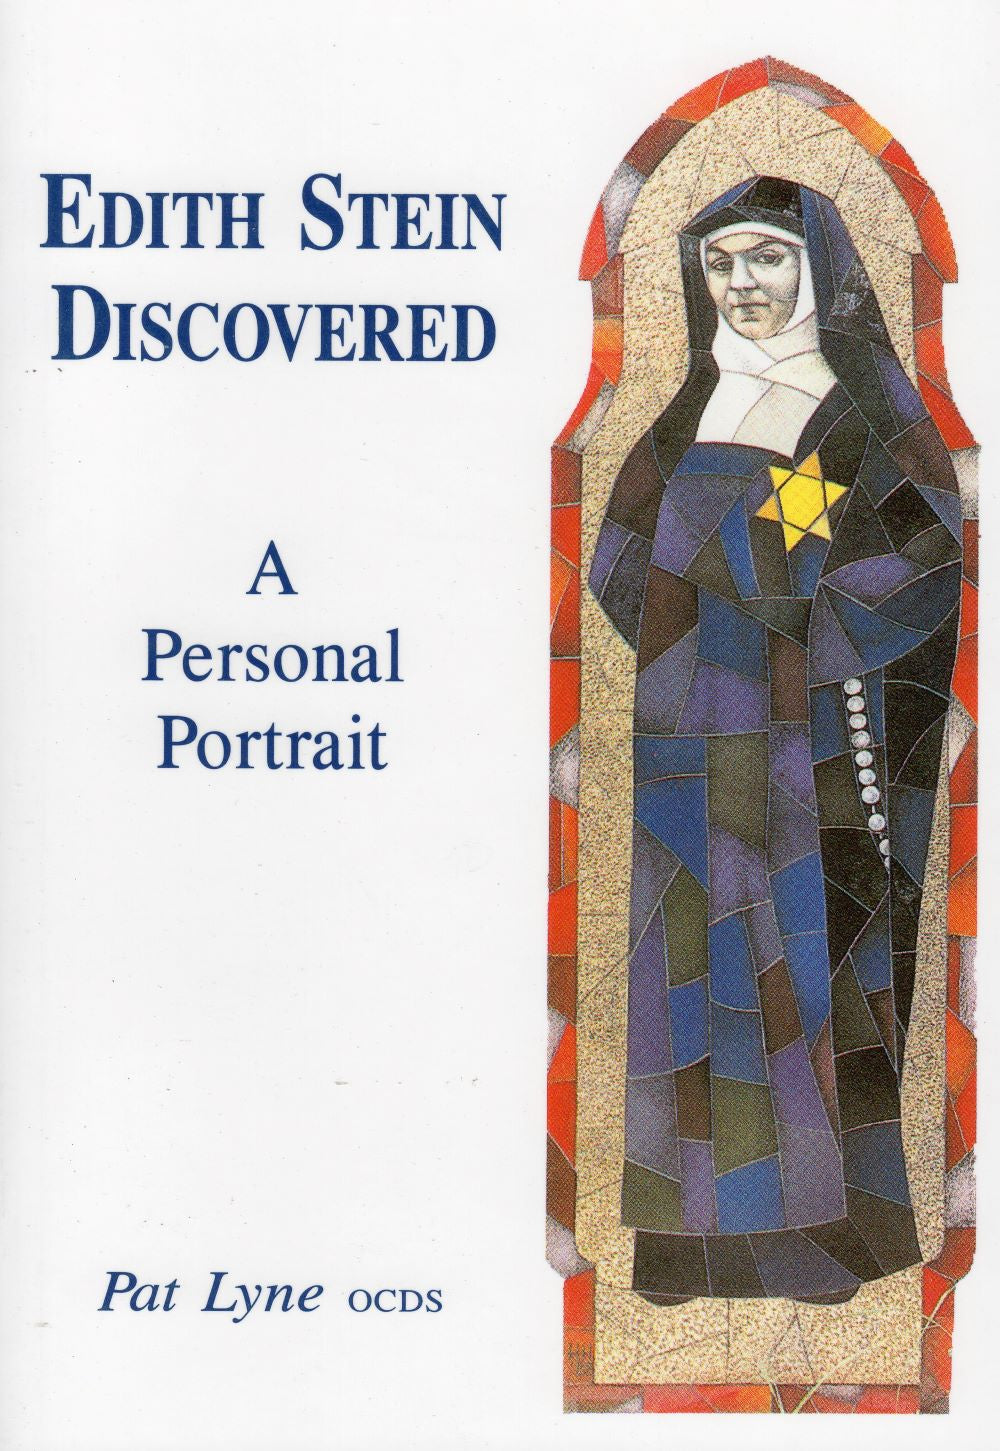 EDITH STEIN DISCOVERED: A Personal Portrait